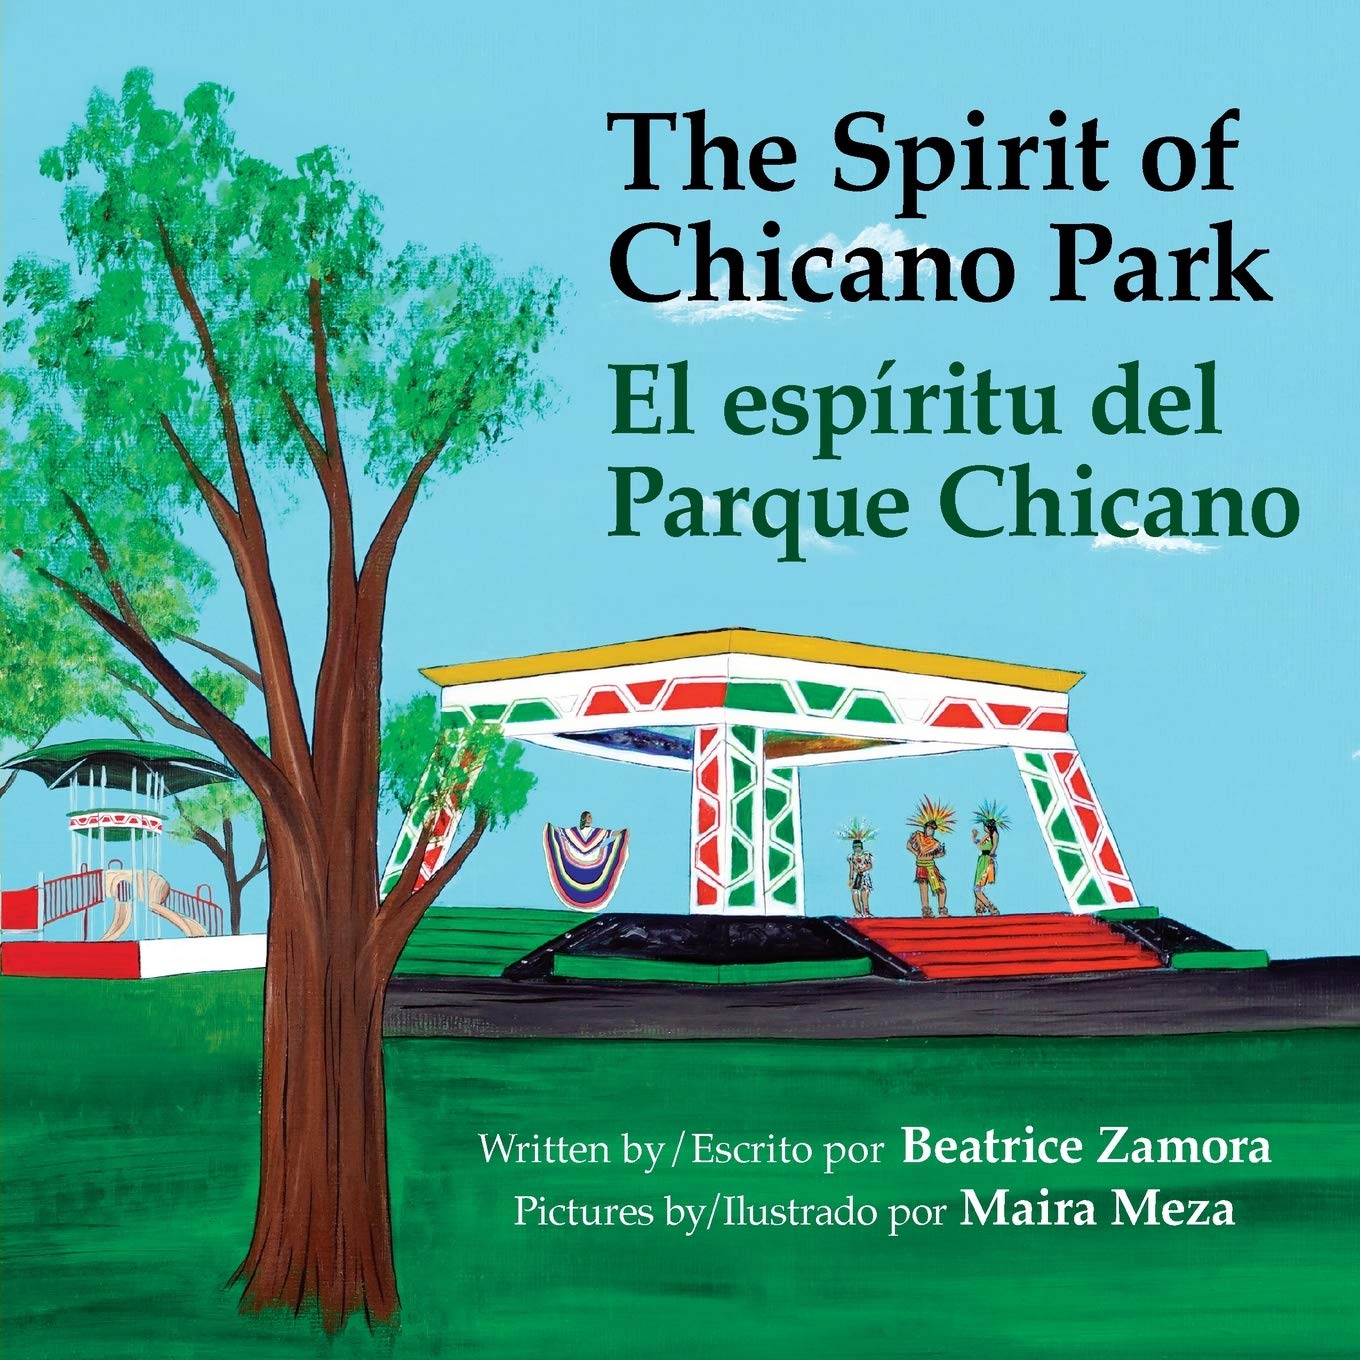 book cover for "the spirit of chicano park"